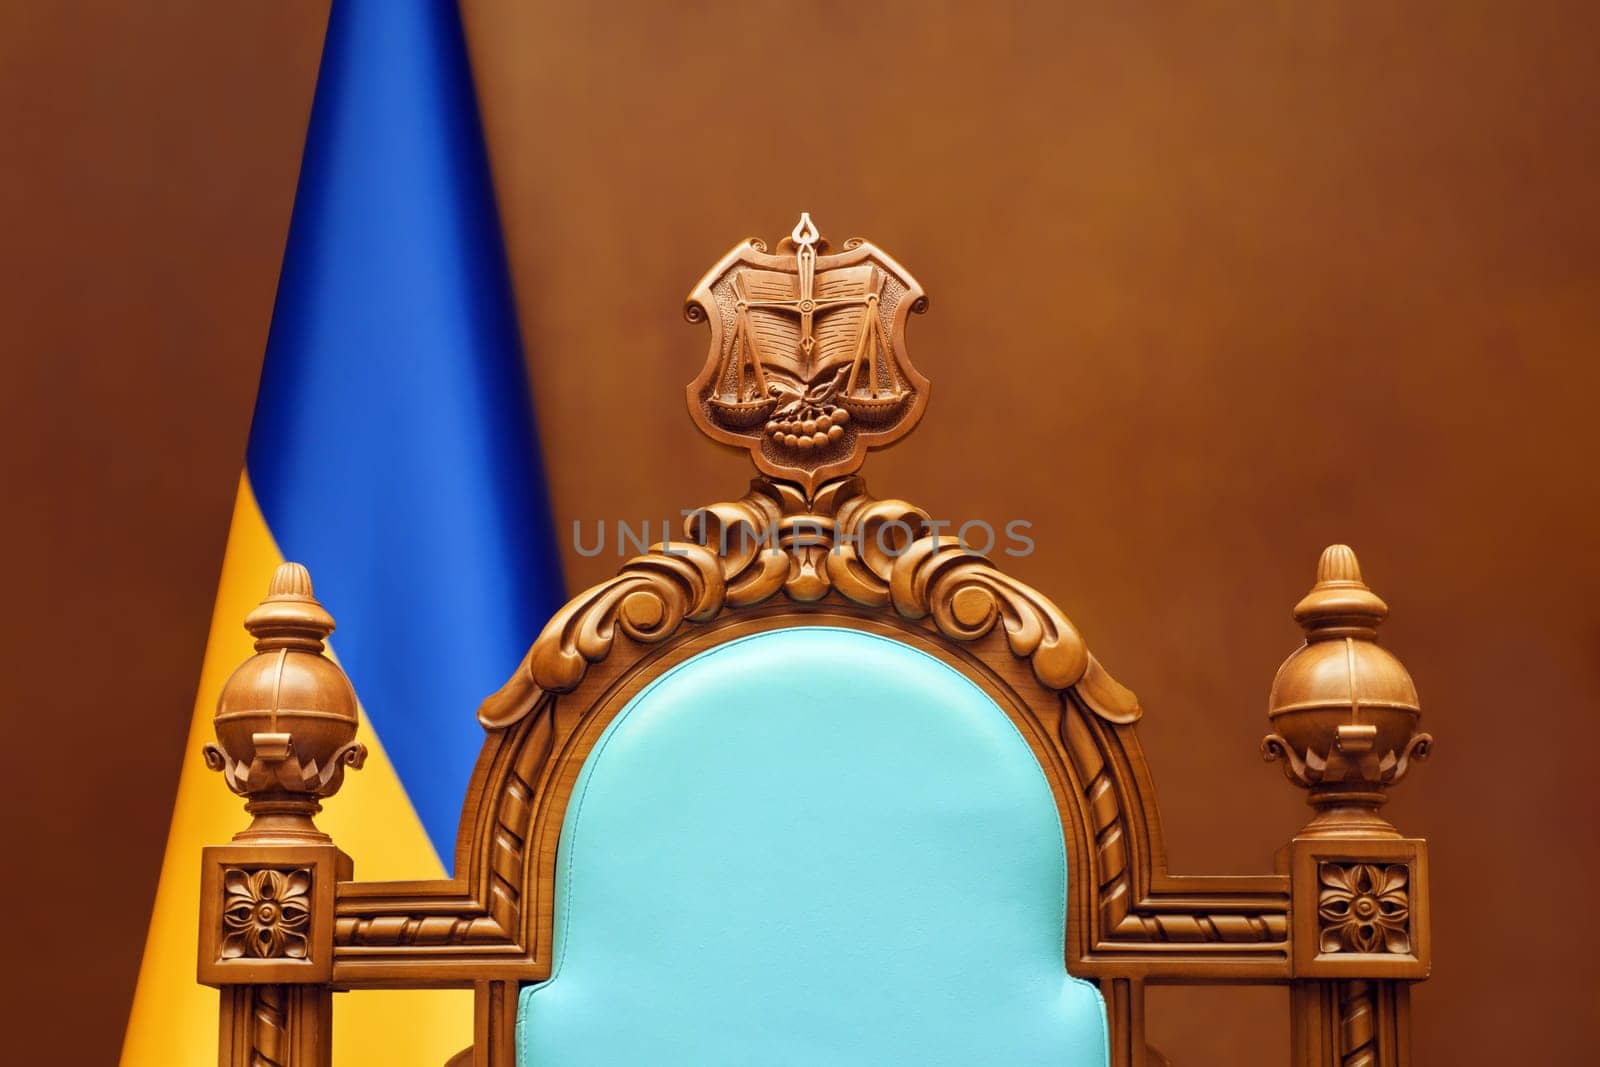 Constitutional Court of Ukraine law justice system. Empty chair judge Ukraine flag in courtroom background. Trial court scales of justice symbol Ukraine justice reform by synel